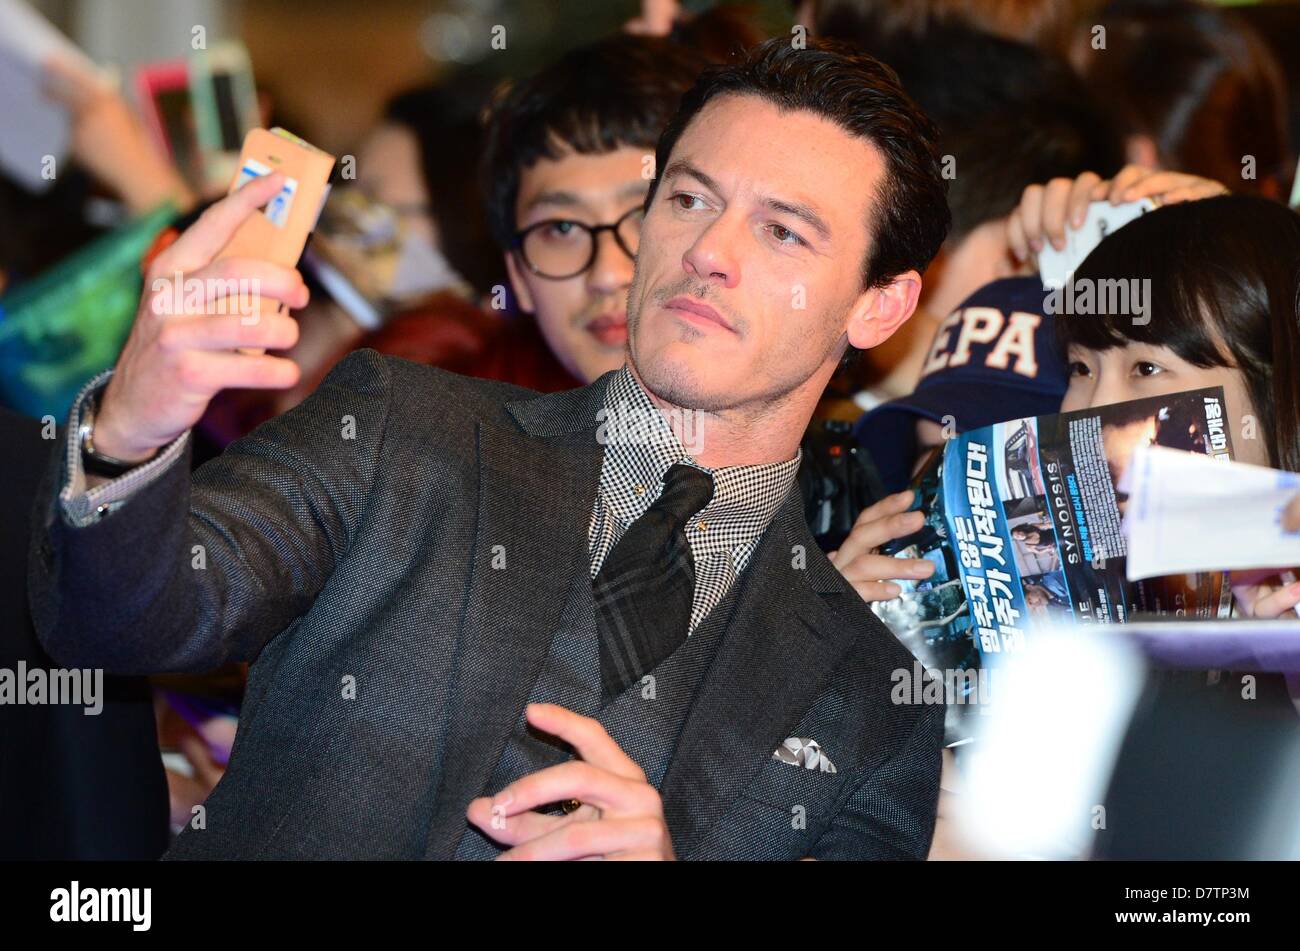 Seoul, South Korea. May 13, 2013. Actor Luke Evans attends the ''Fast & Furious 6''press conference on May 13, 2013 in Seoul, South Korea. Fast & Furious 6 will be released in South Korea on May 23. (Credit Image: Credit:  Janabp/Jana Press/ZUMAPRESS.com/Alamy Live News) Stock Photo